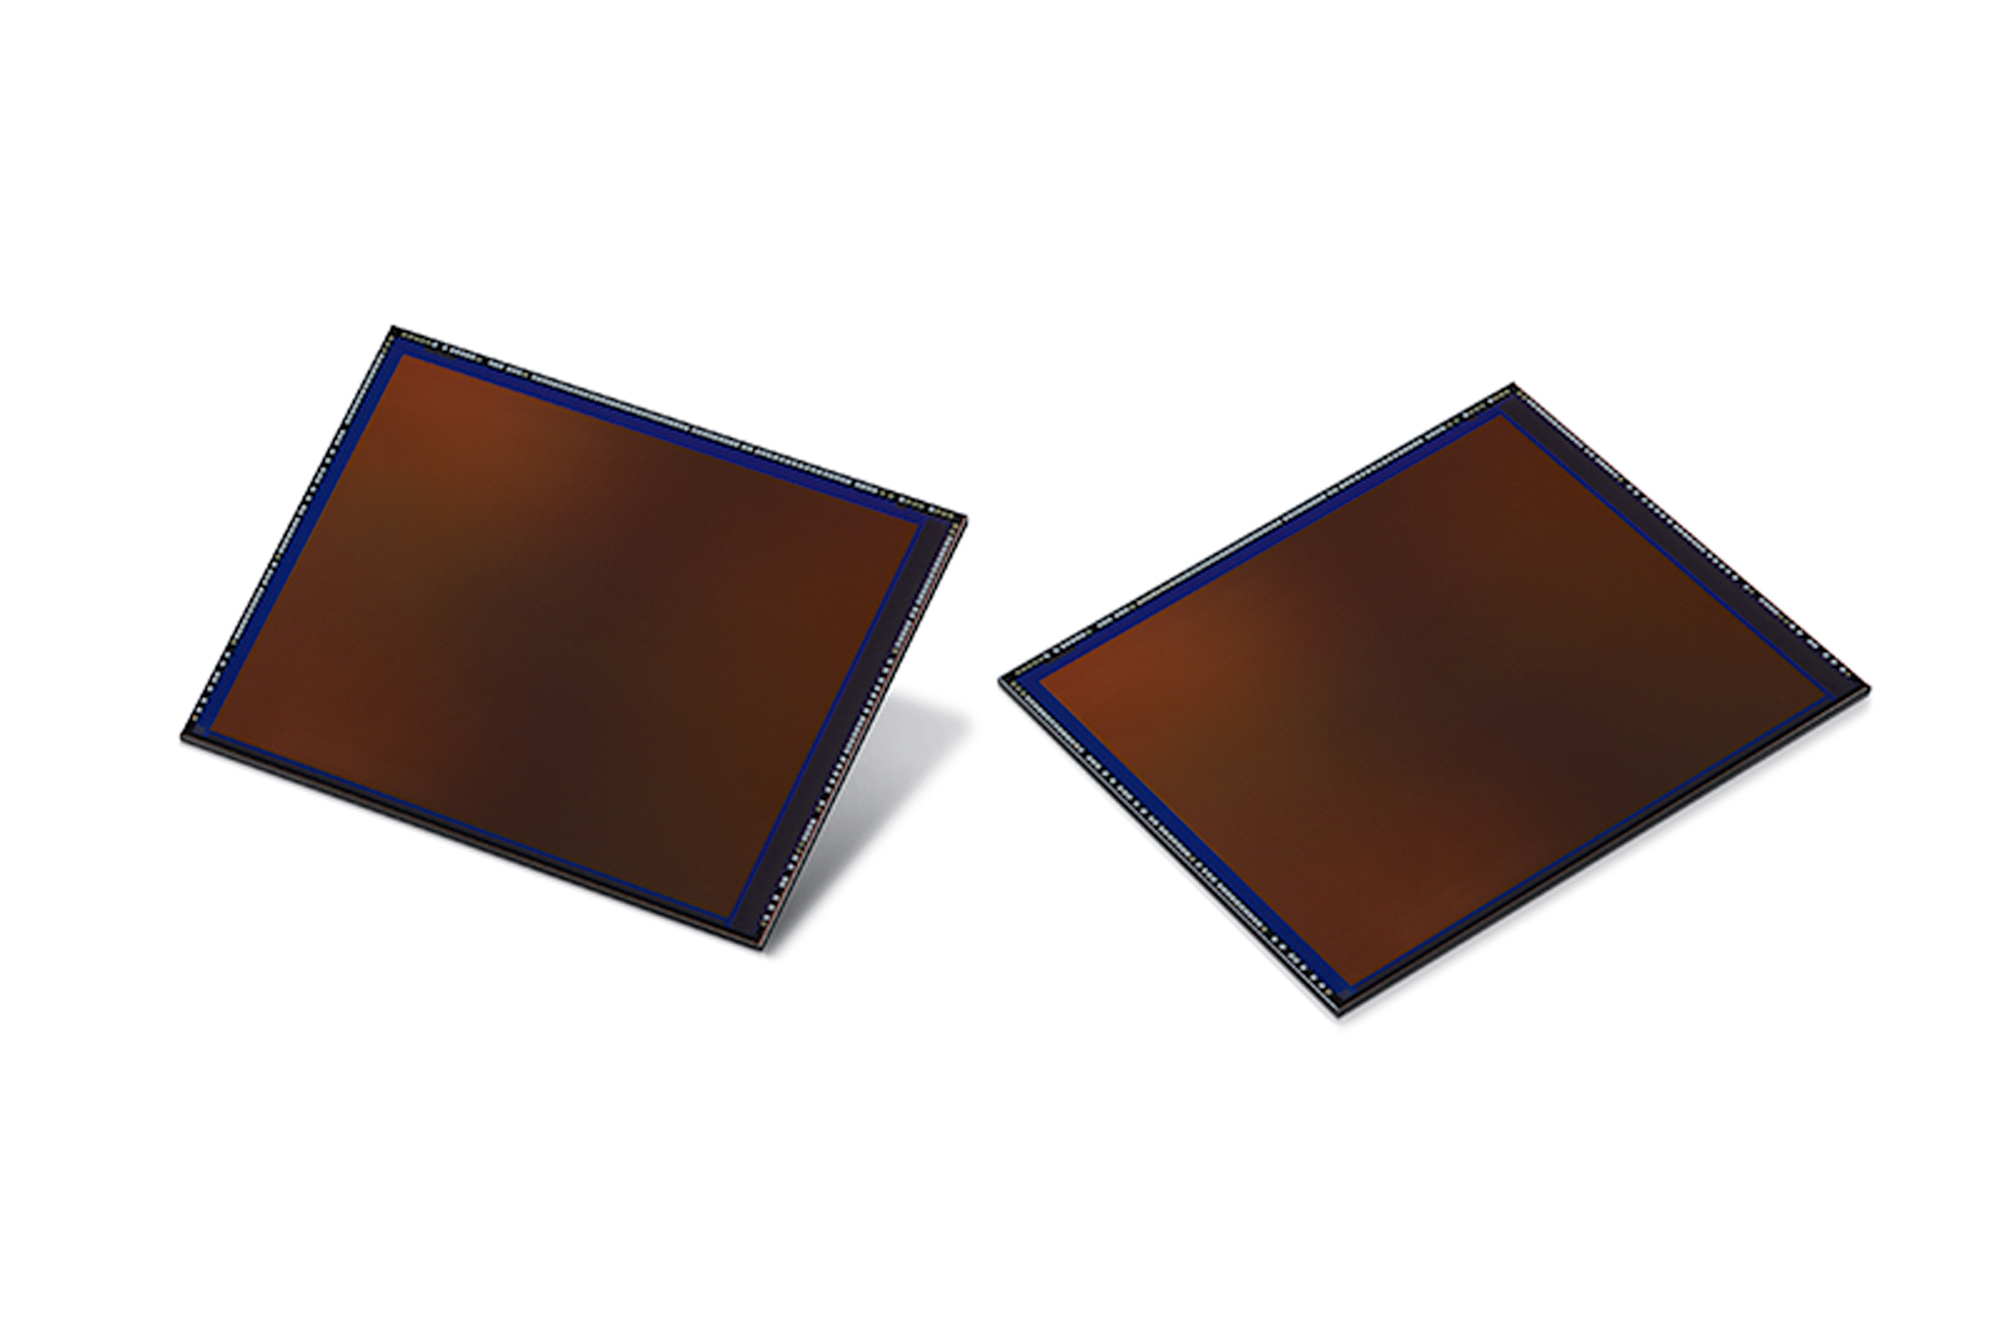 Who Needs Medium Format? Samsung Launches Industry First 108 Megapixel Image Sensor for Smartphones